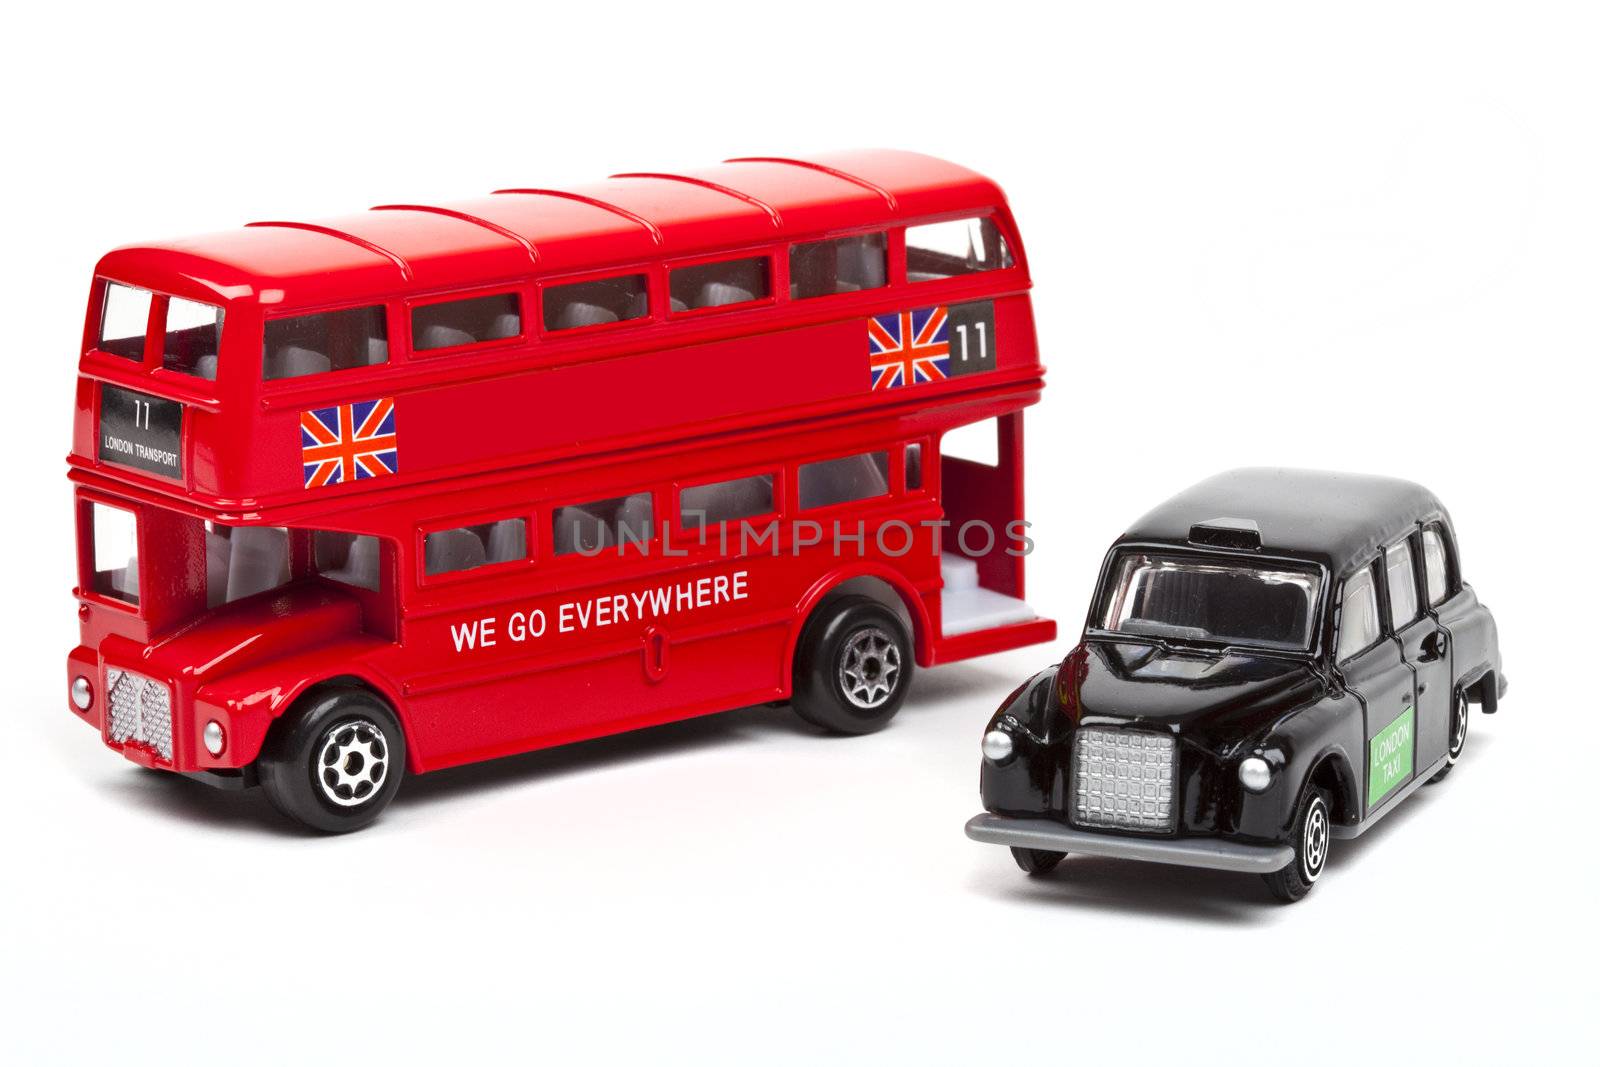 London Red Bus and Taxi by chrisdorney